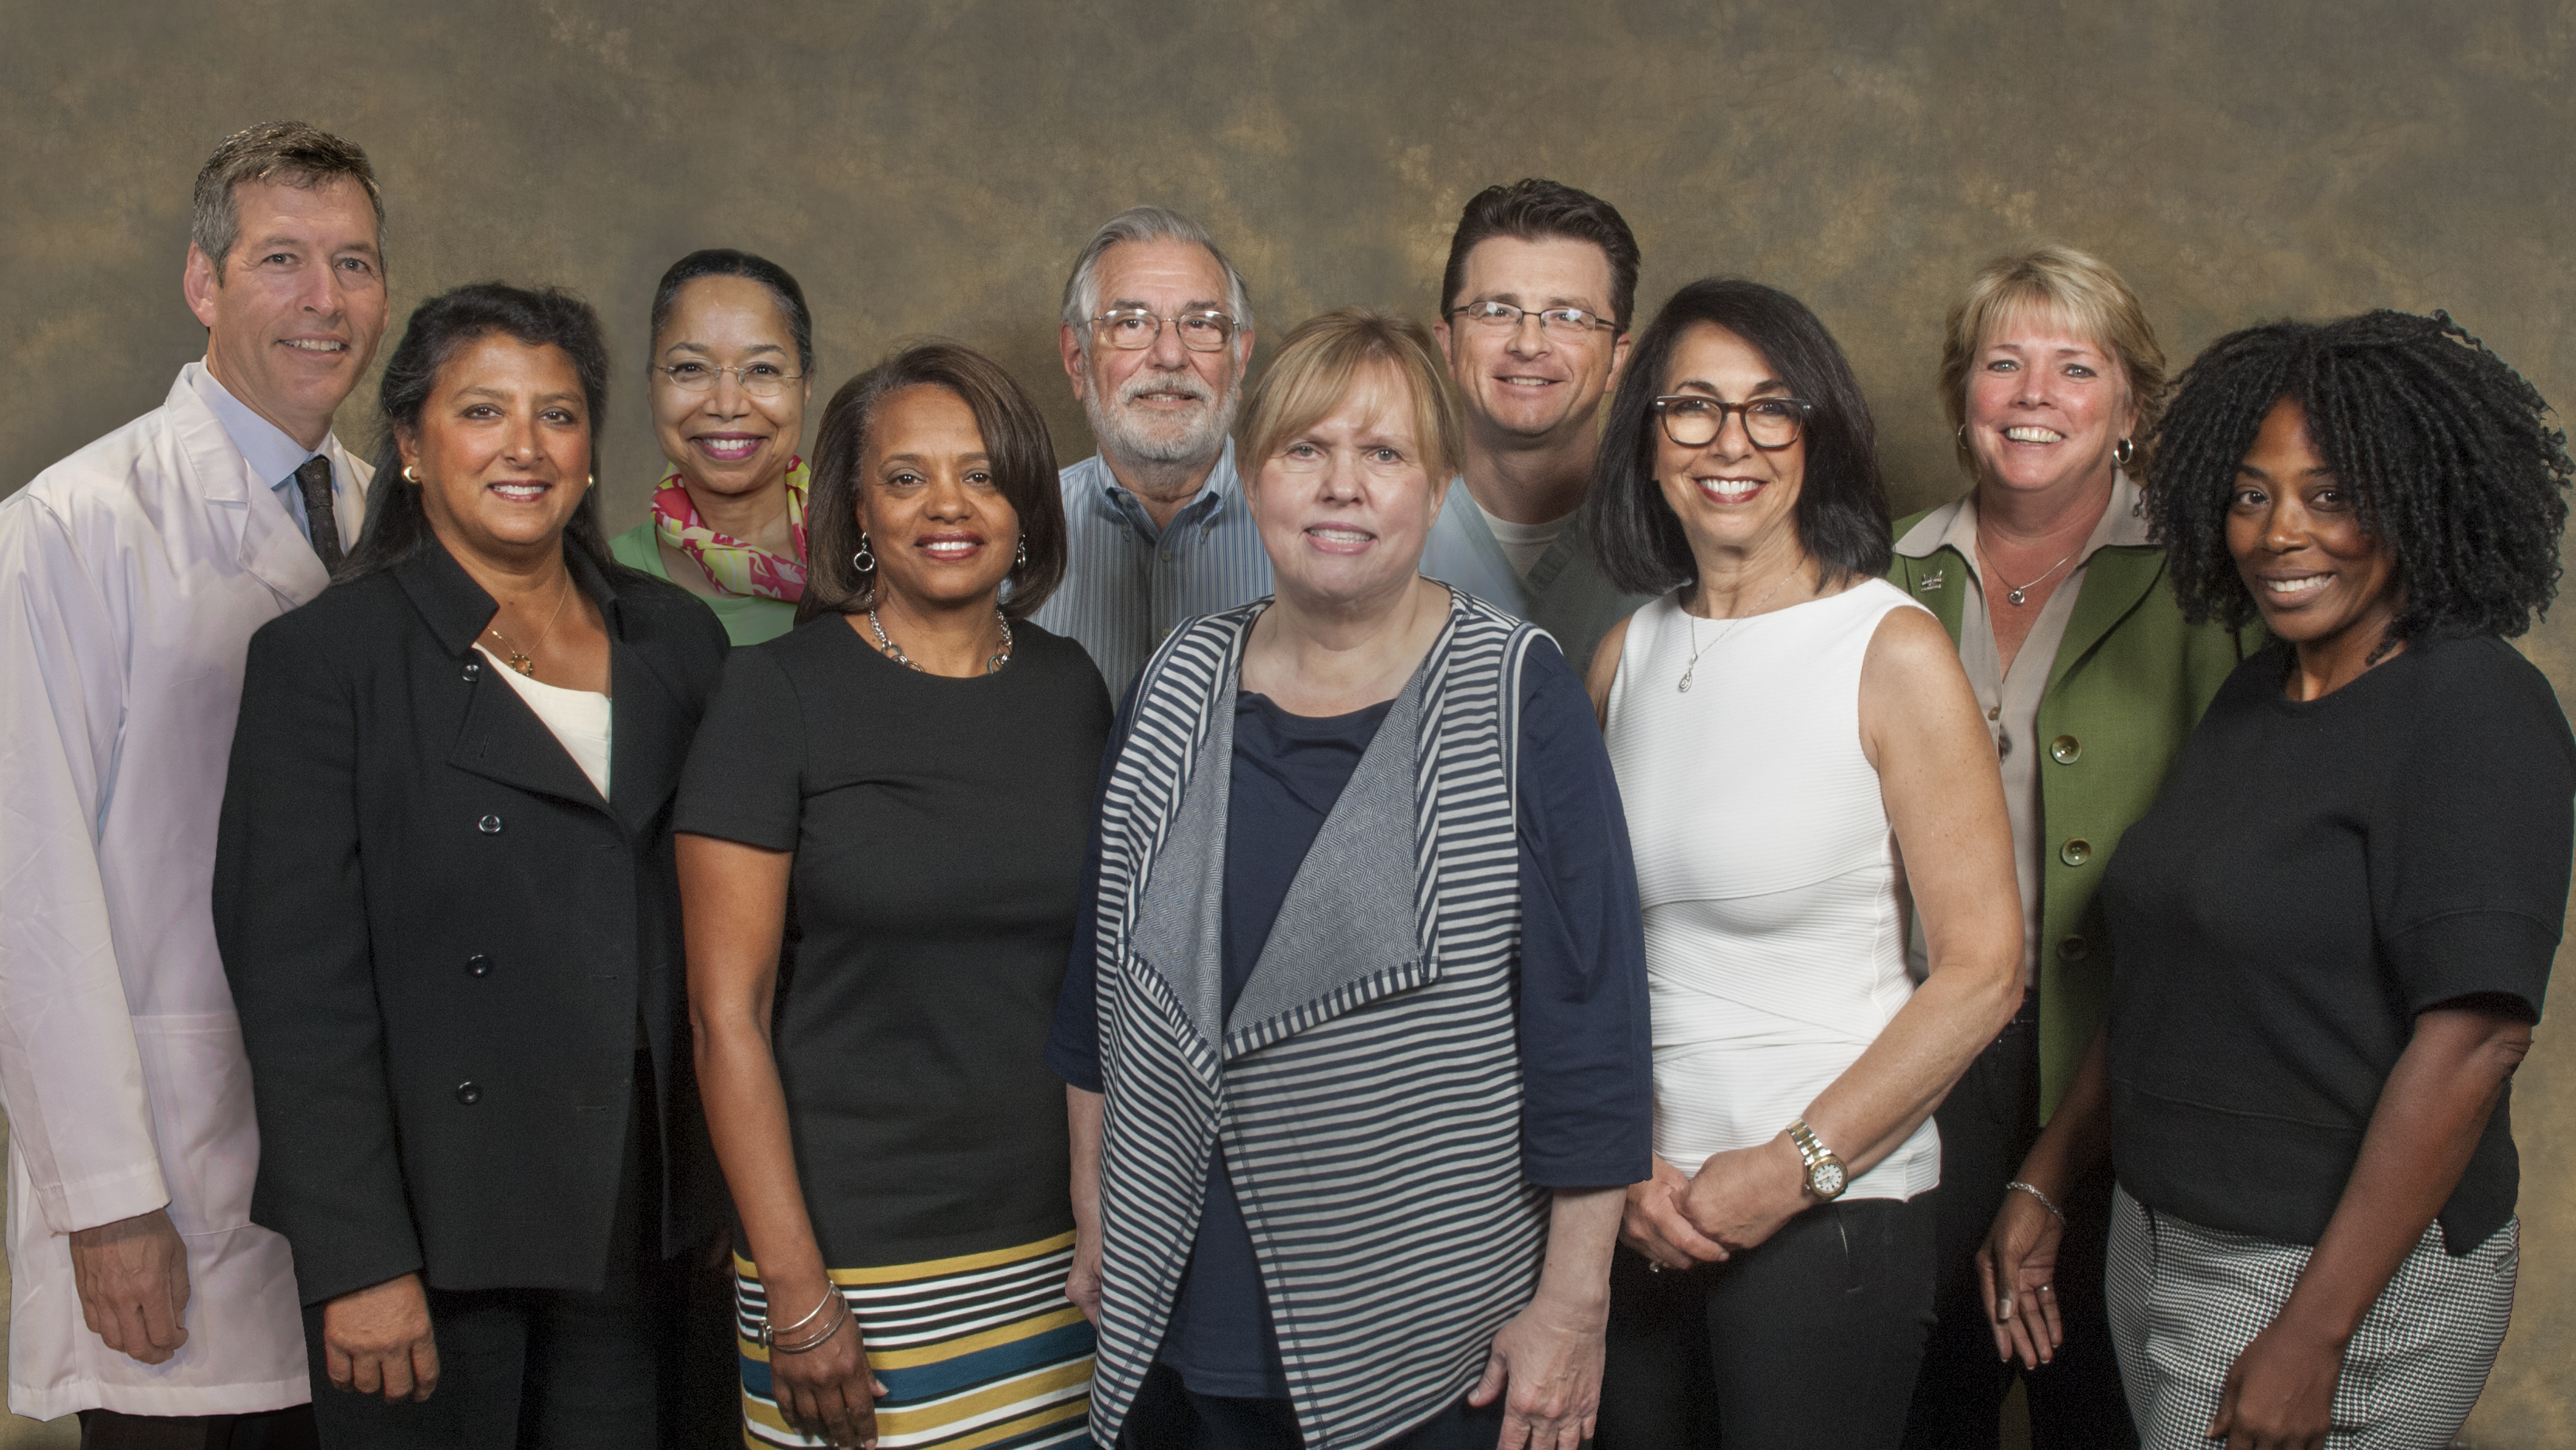 Call for Nominations - Medical Alumni Association Board of Governors 